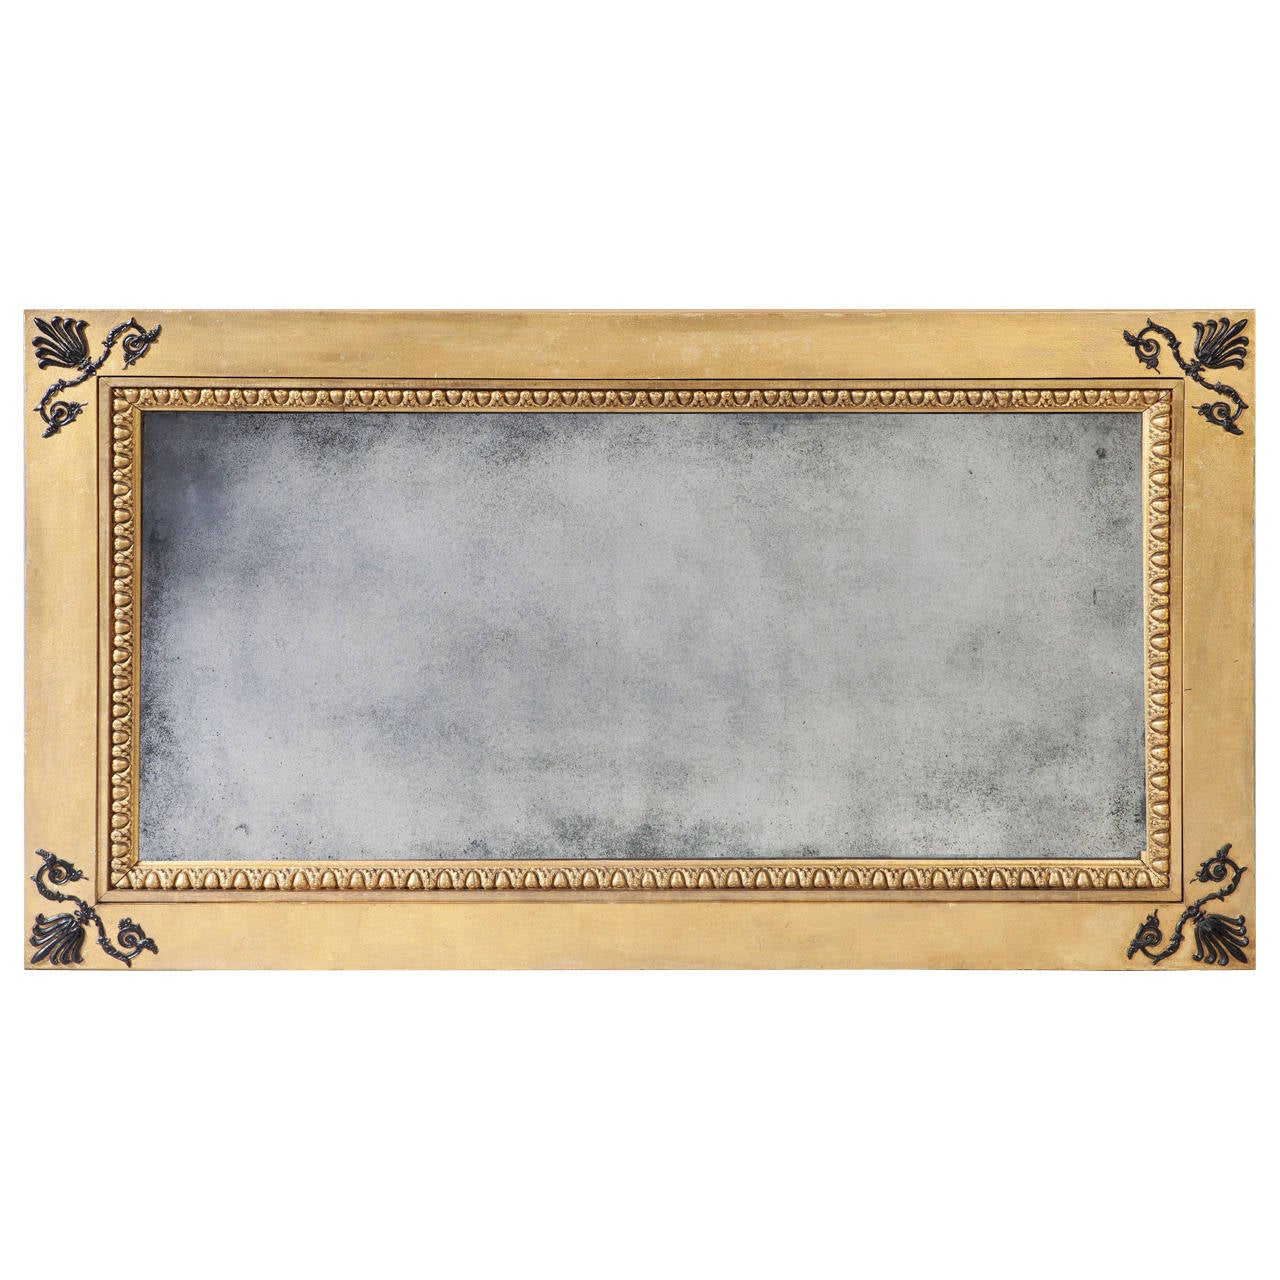 A rare and unusual Regency parcel-gilt mechanical patent overmantel mirror. The outer frame is enriched at the corners with bronze patinated anthemia supported by scrolls against a sanded gilt ground. The inner frame is bordered with an egg and dart